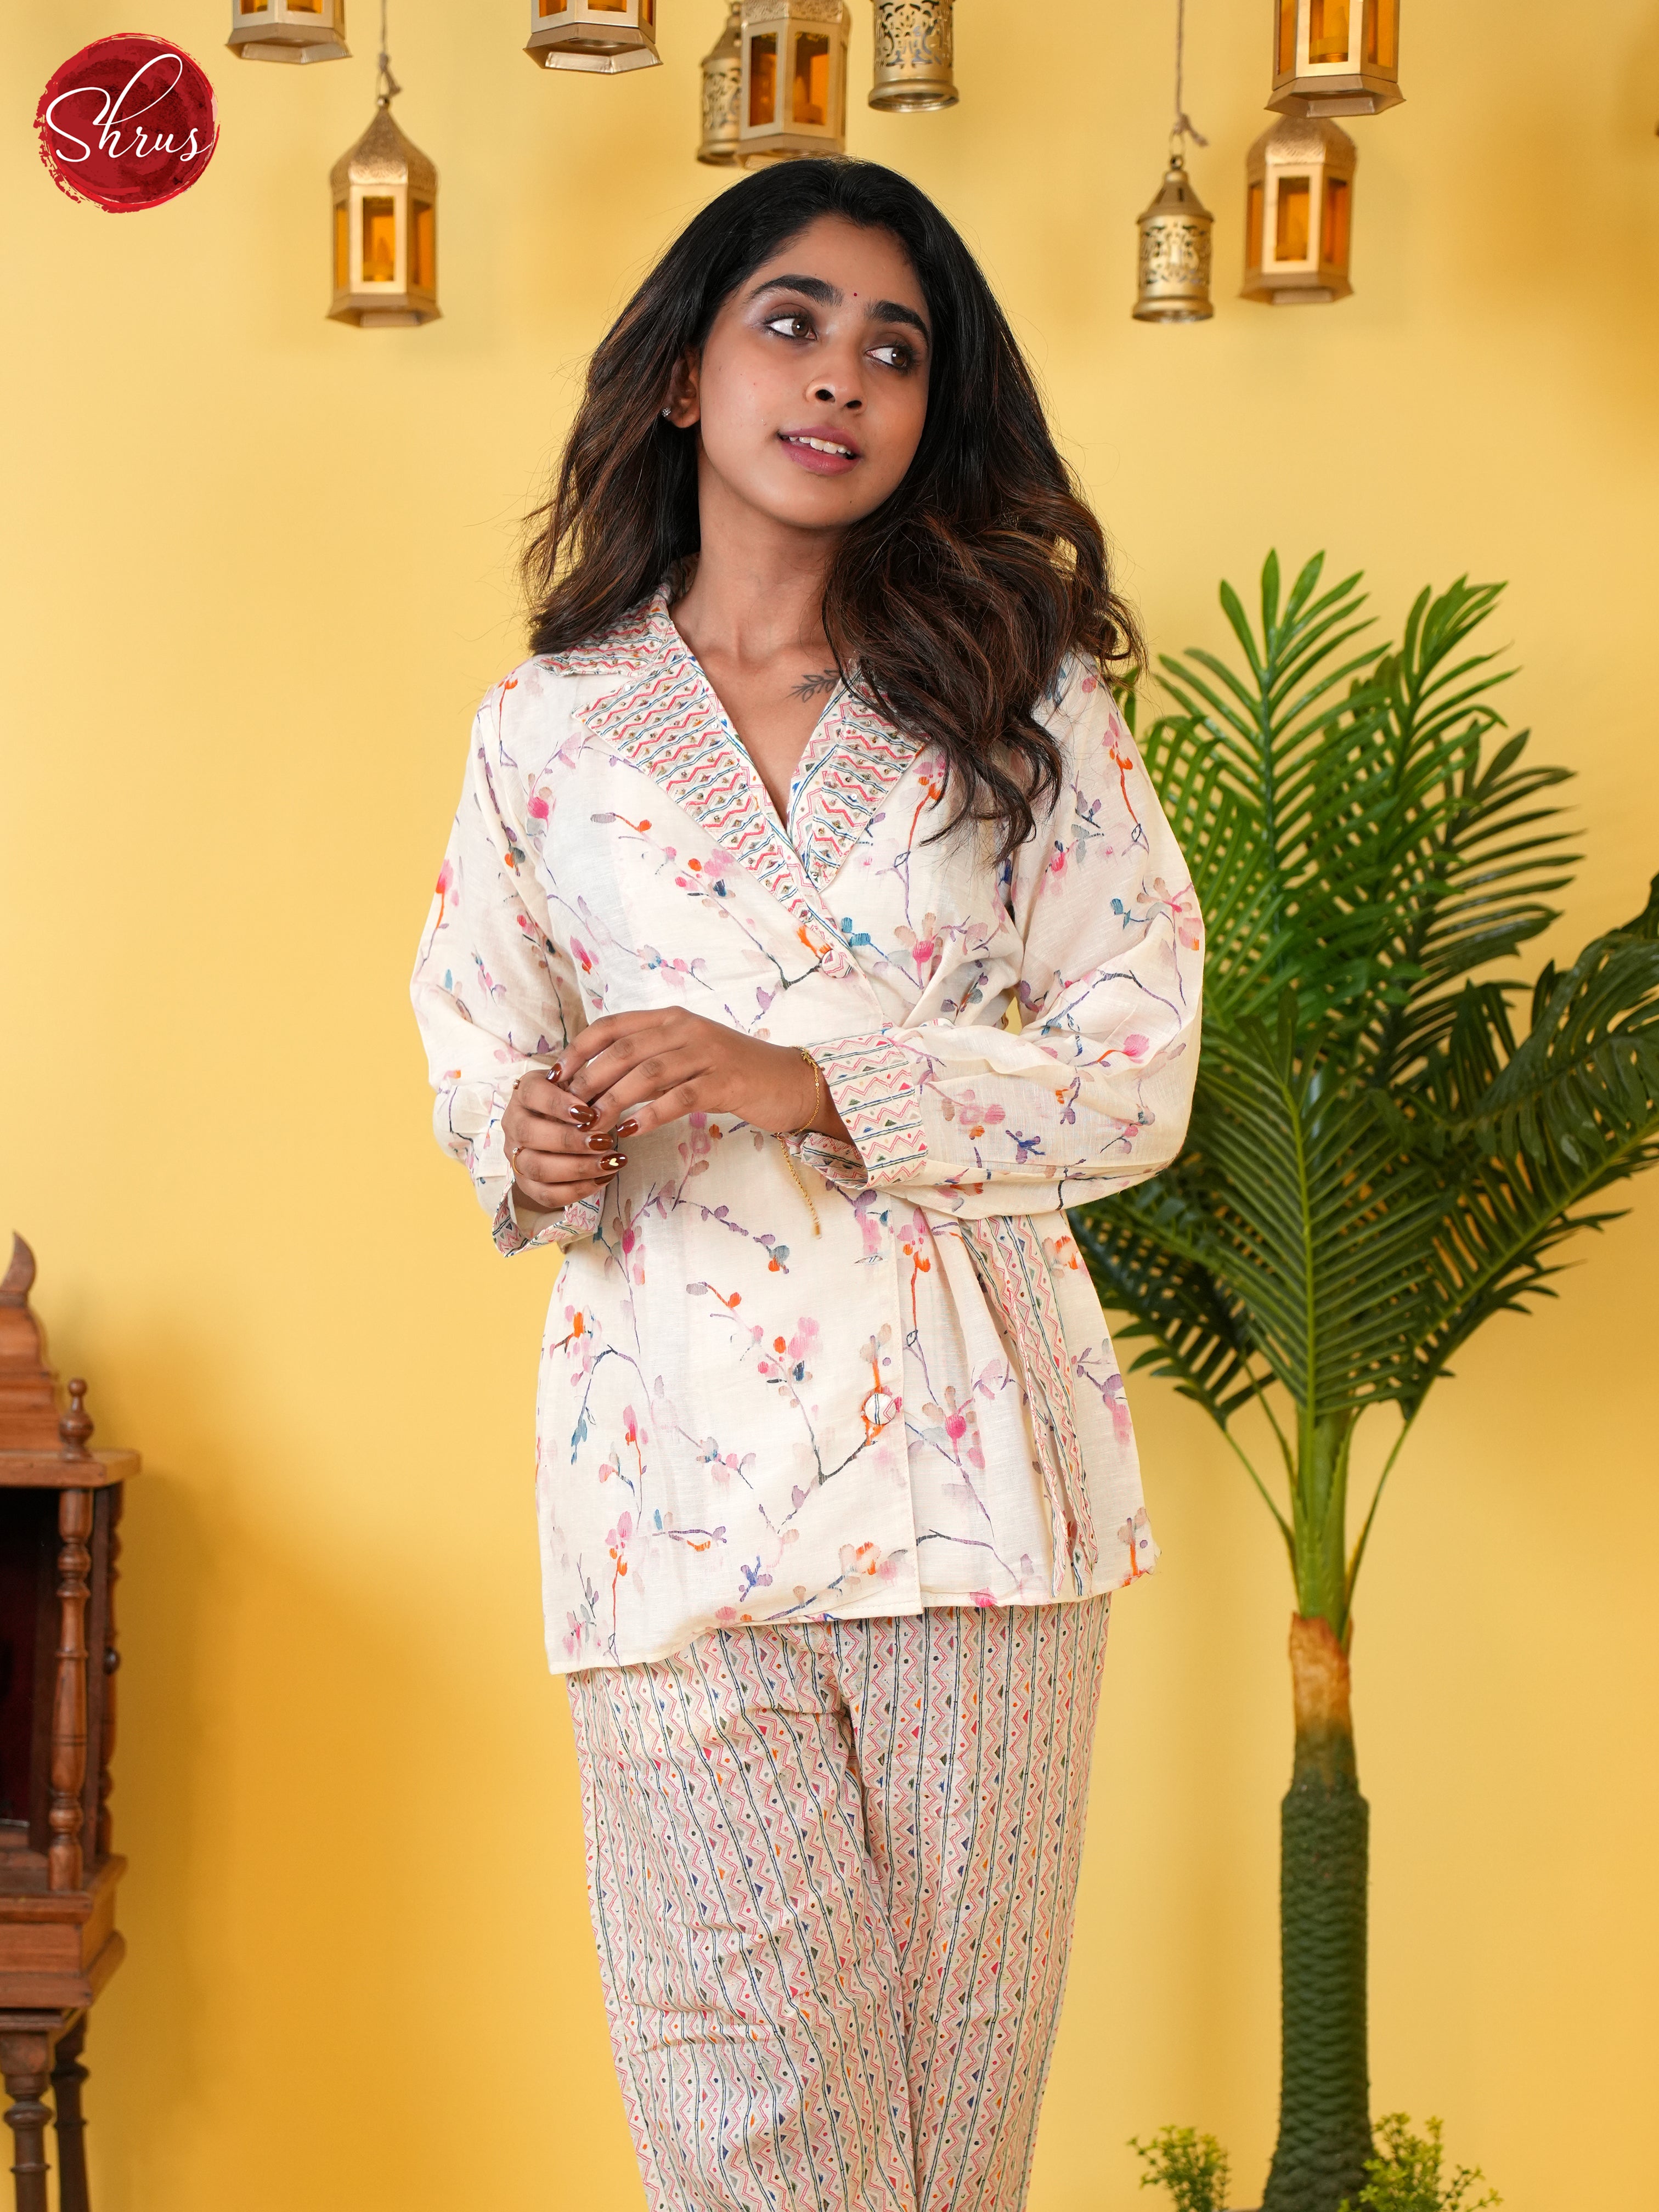 Cream - 2pc floral printed Readymade suit (co - ord ) - Shop on ShrusEternity.com